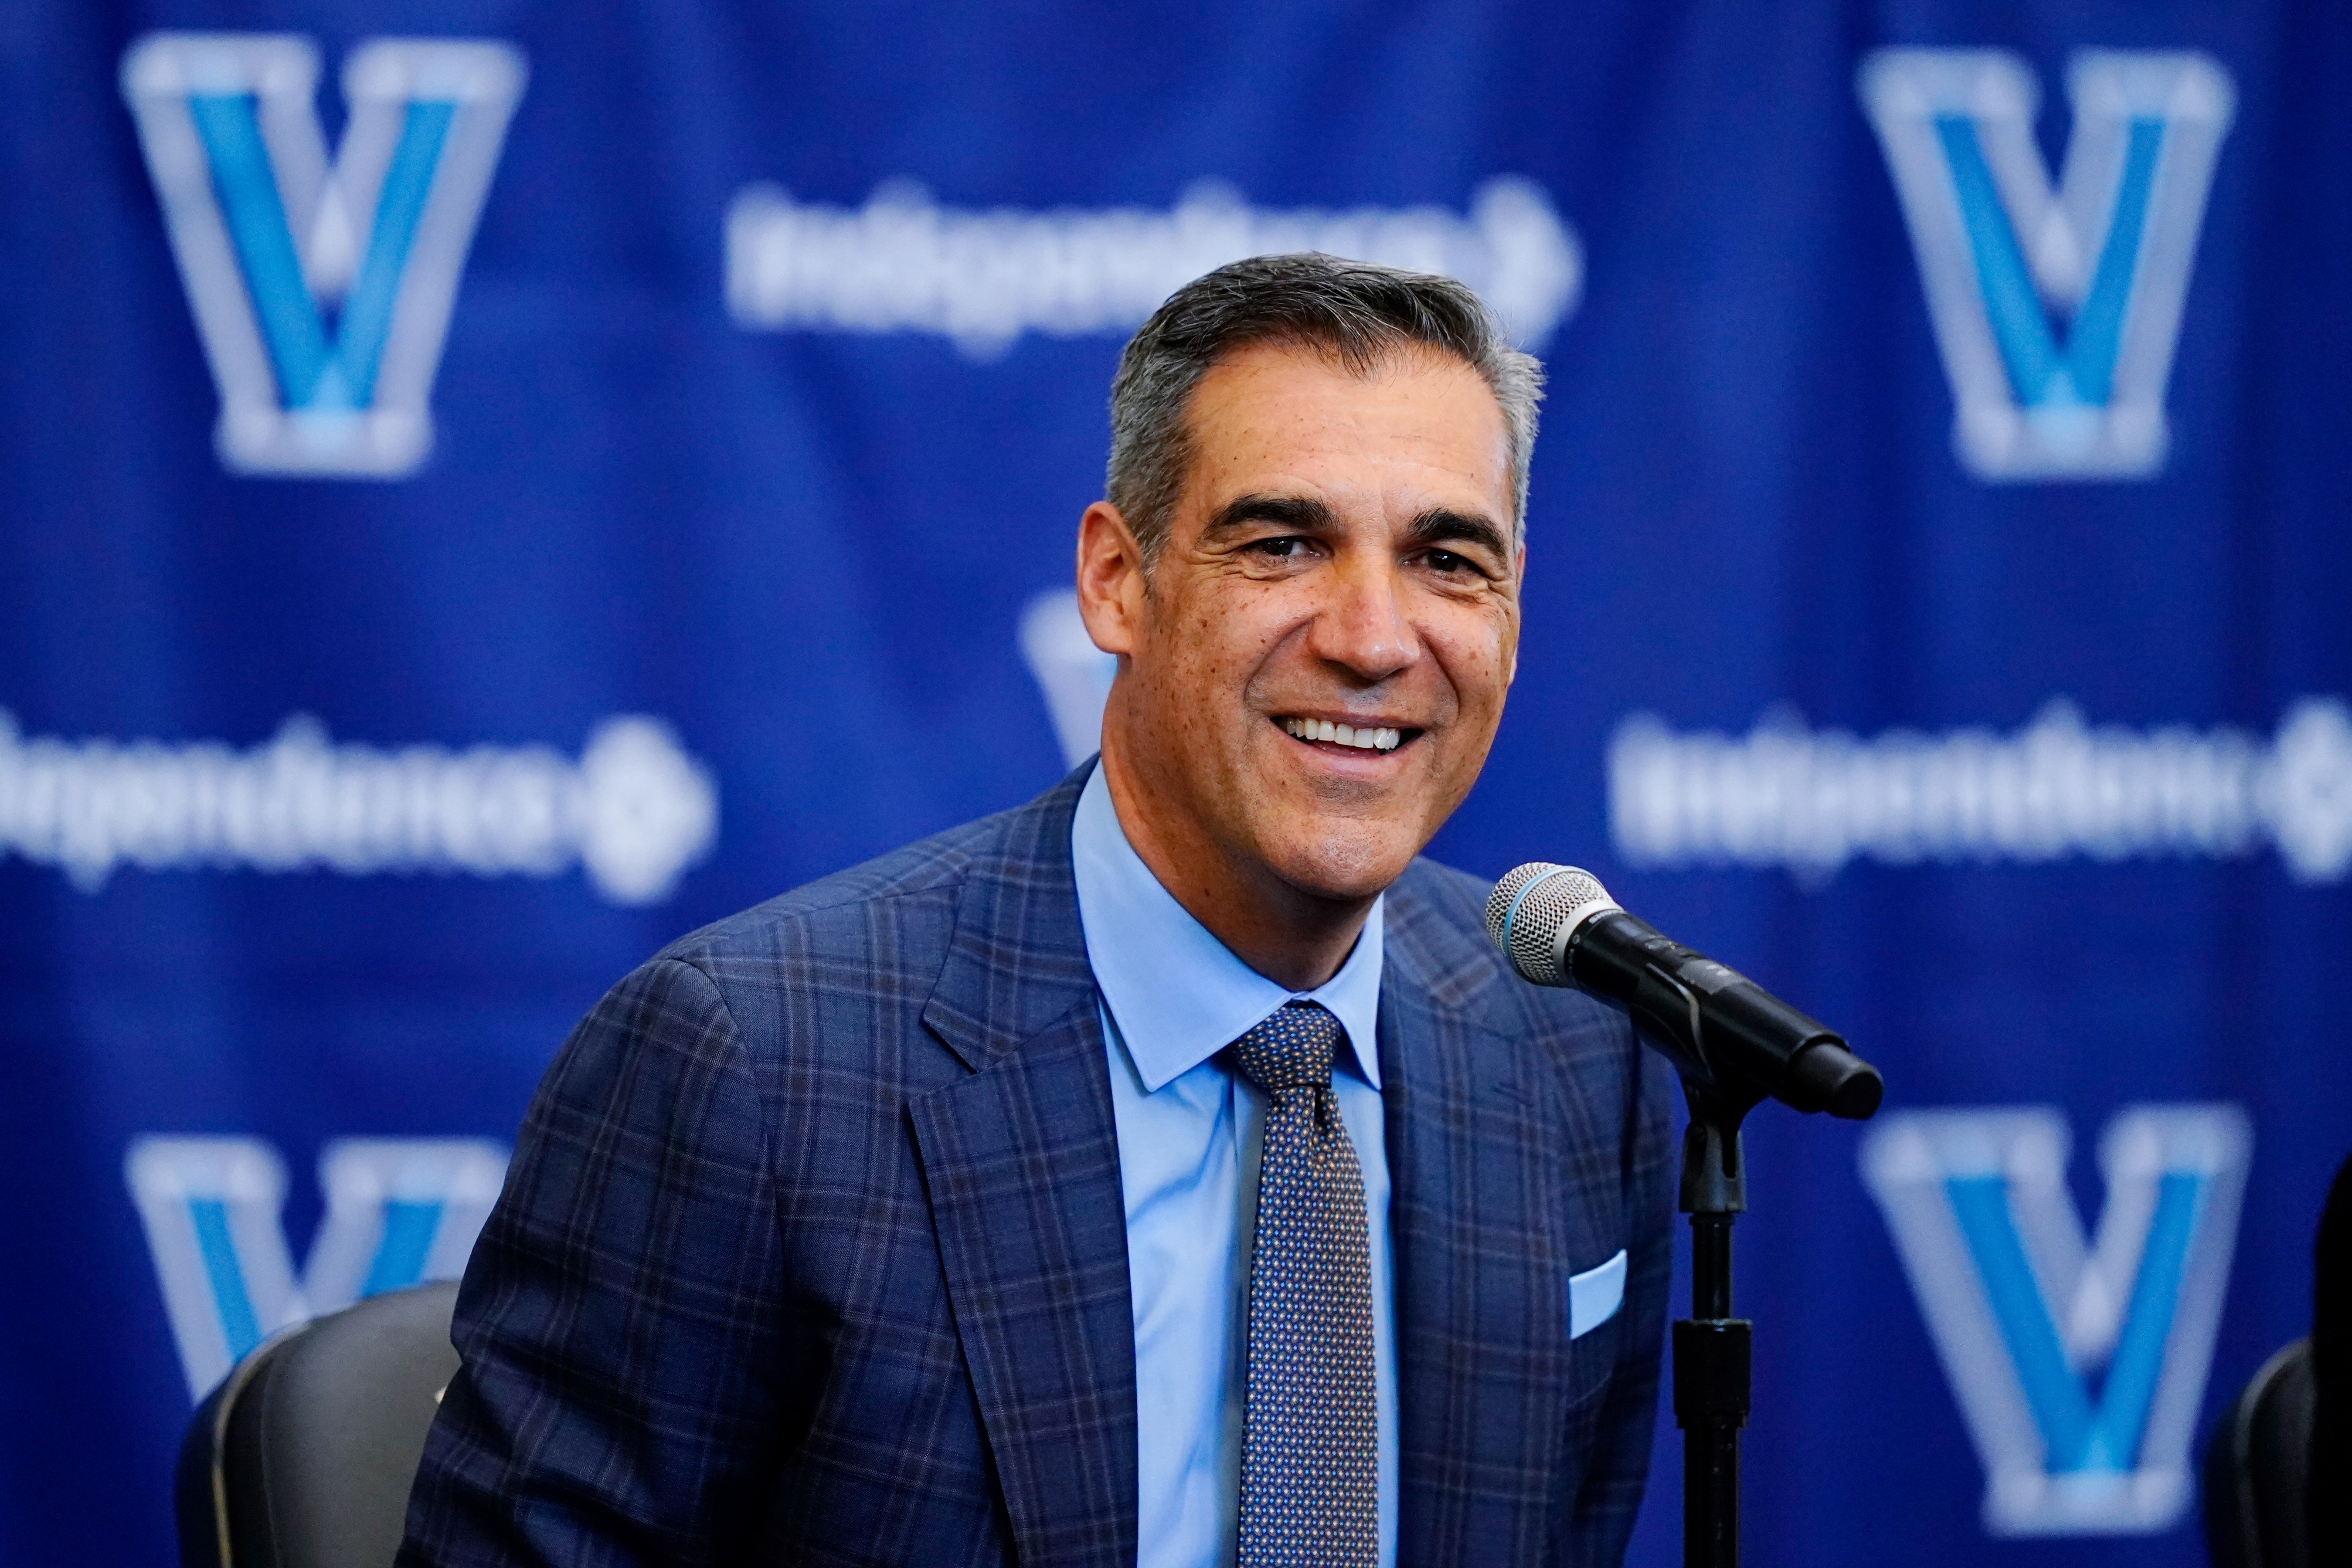 Jay Wright replaced by Kyle Neptune: Everything to know about retirement,  record and more